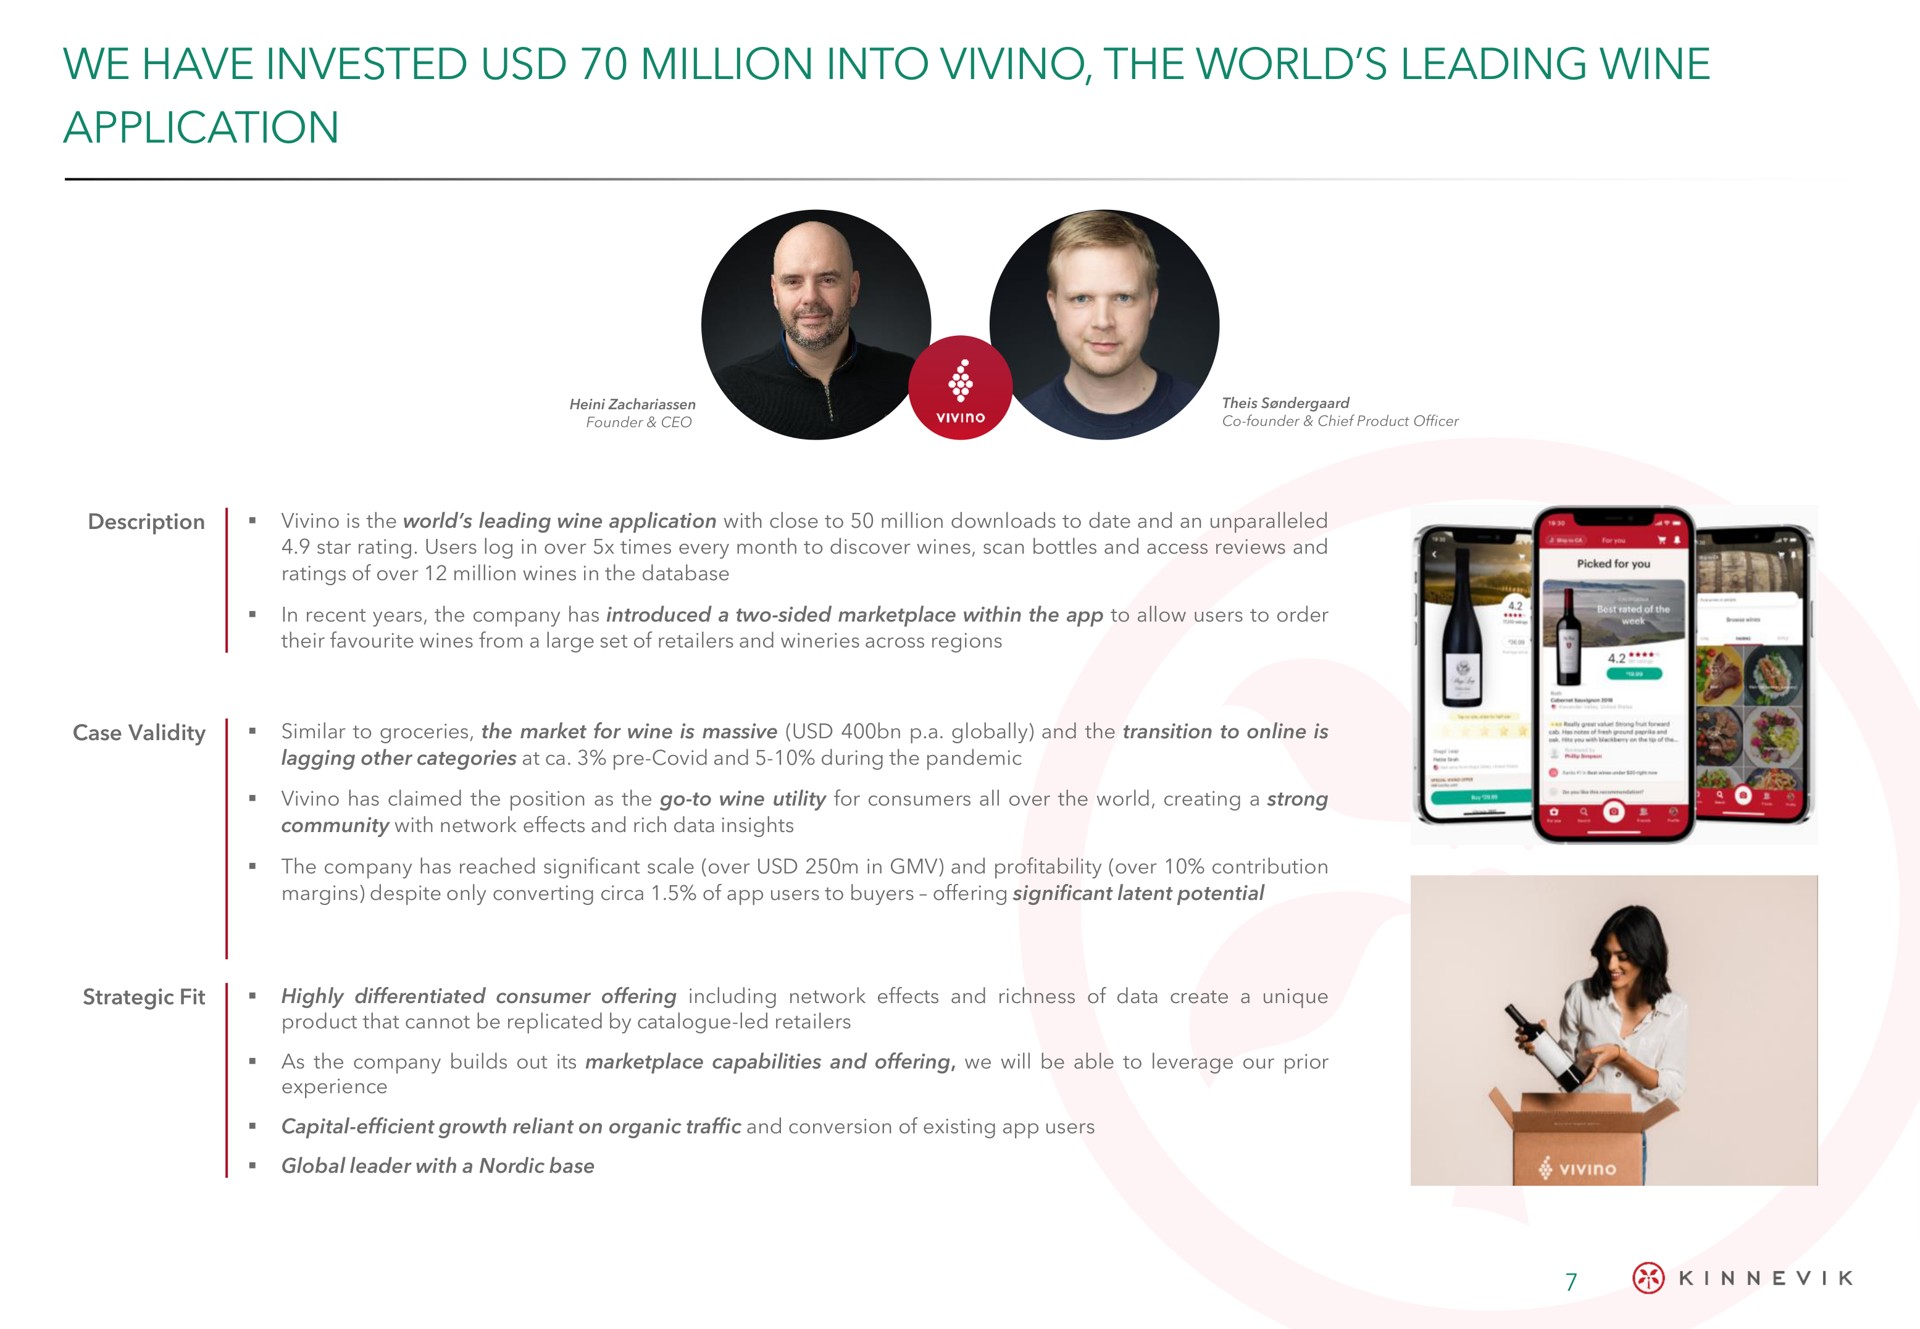 we have invested million into the world leading wine application | Kinnevik